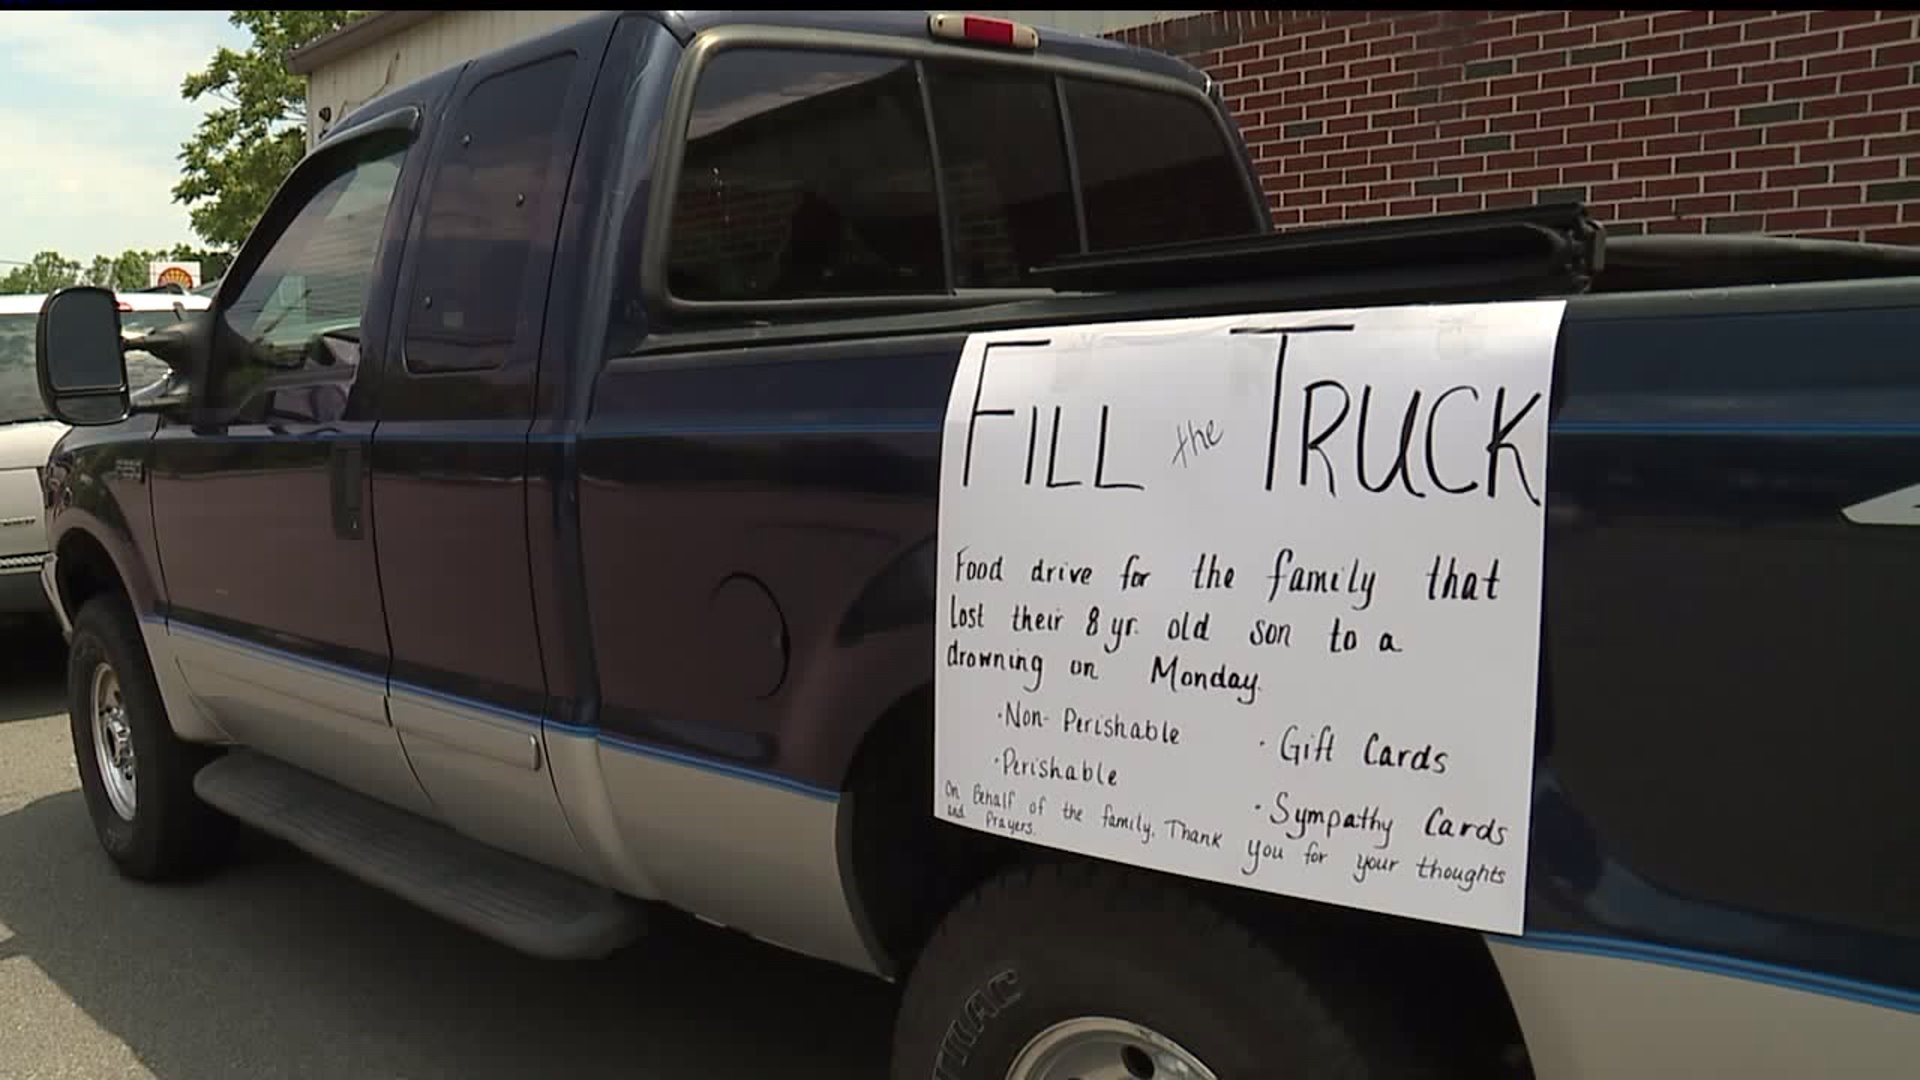 Community holds `Fill the Truck Food Drive` to help family of 8-year old boy who drowned